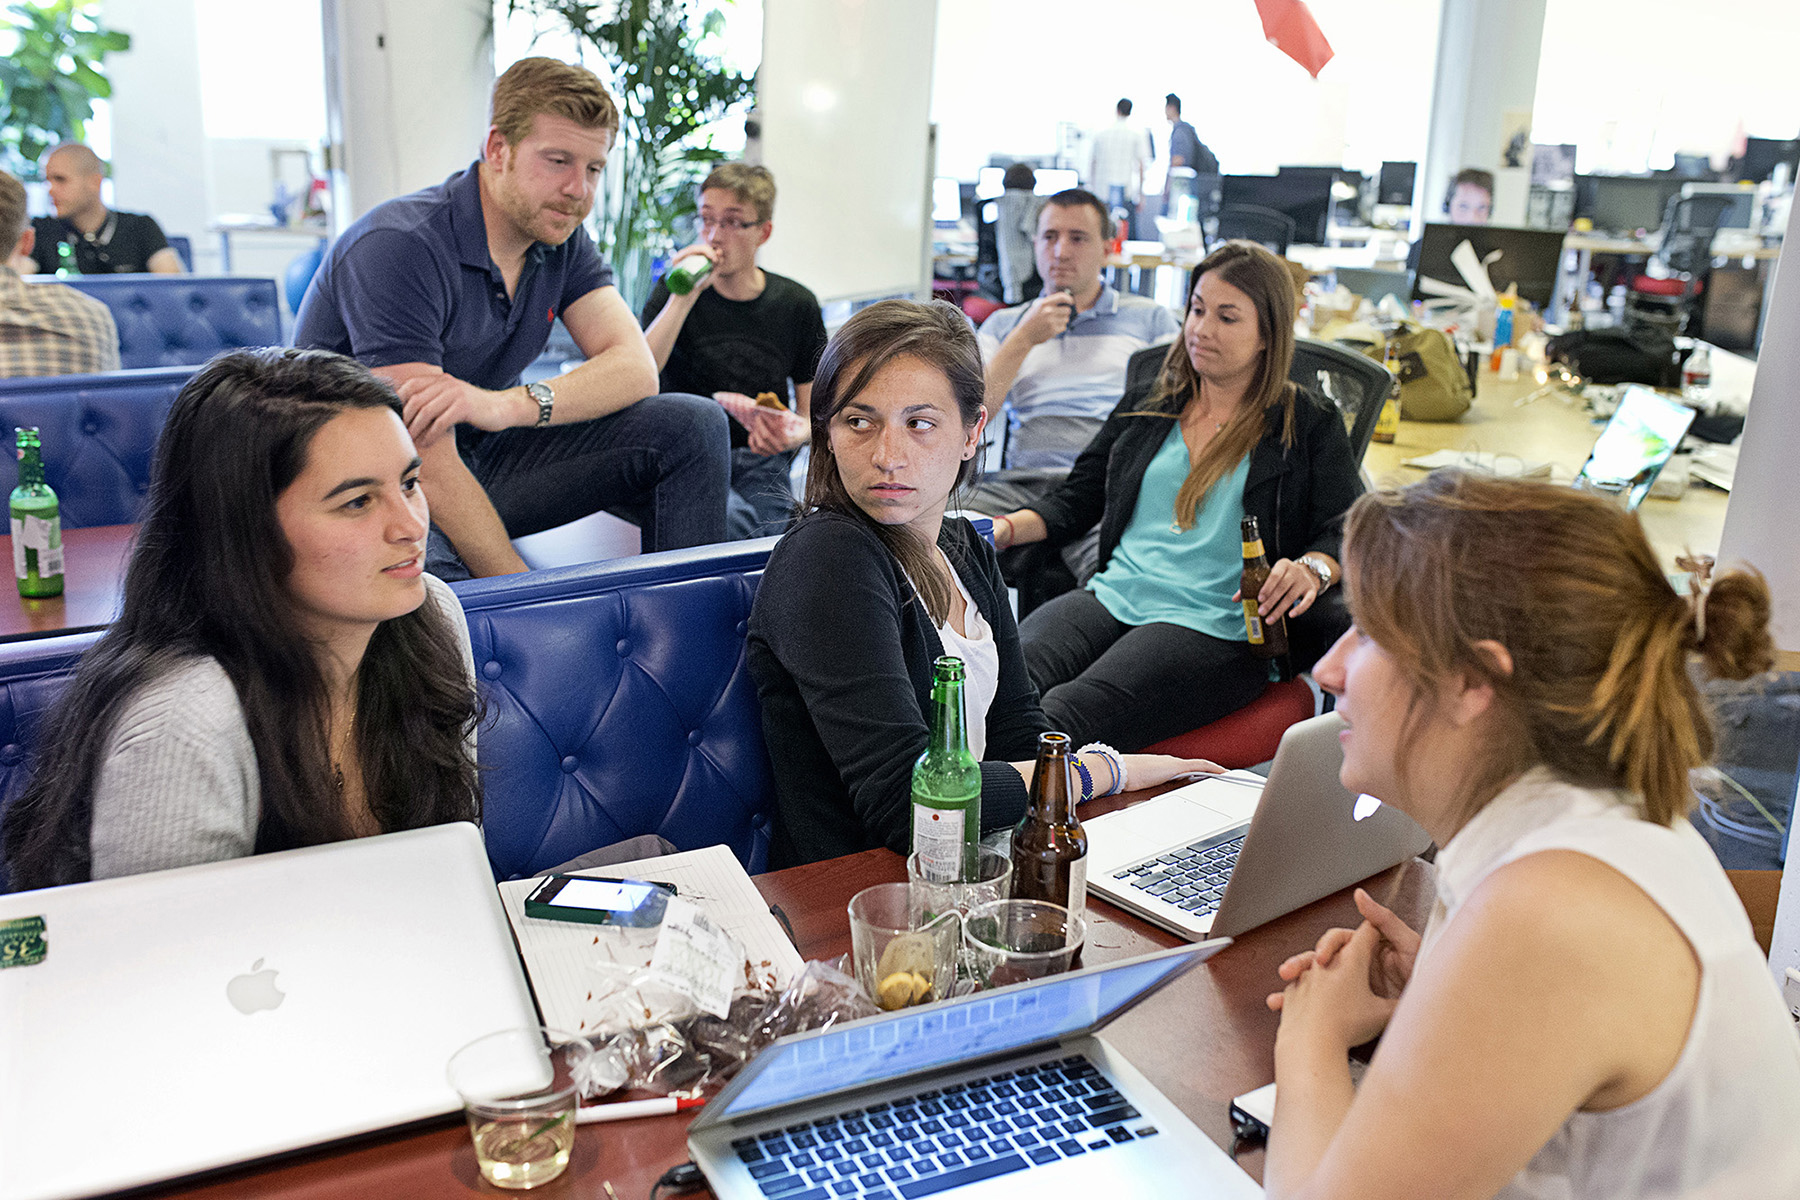 Danielle Gaglioti, center, talks with her co-worker Mackenzie Hughes, right, and their intern Sandy Frank during a happy hour event at the co-working space Hatch Today in San Francisco, Calif., in August 2014. They were working out of Hatch Today for the summer on their company Akimbo while participating in Tumml, an urban venture accelerator program. Co-working spaces are popular with smaller start-ups, both as a way to keep office costs down and to be surrounded by a community of other entrepreneurs. 